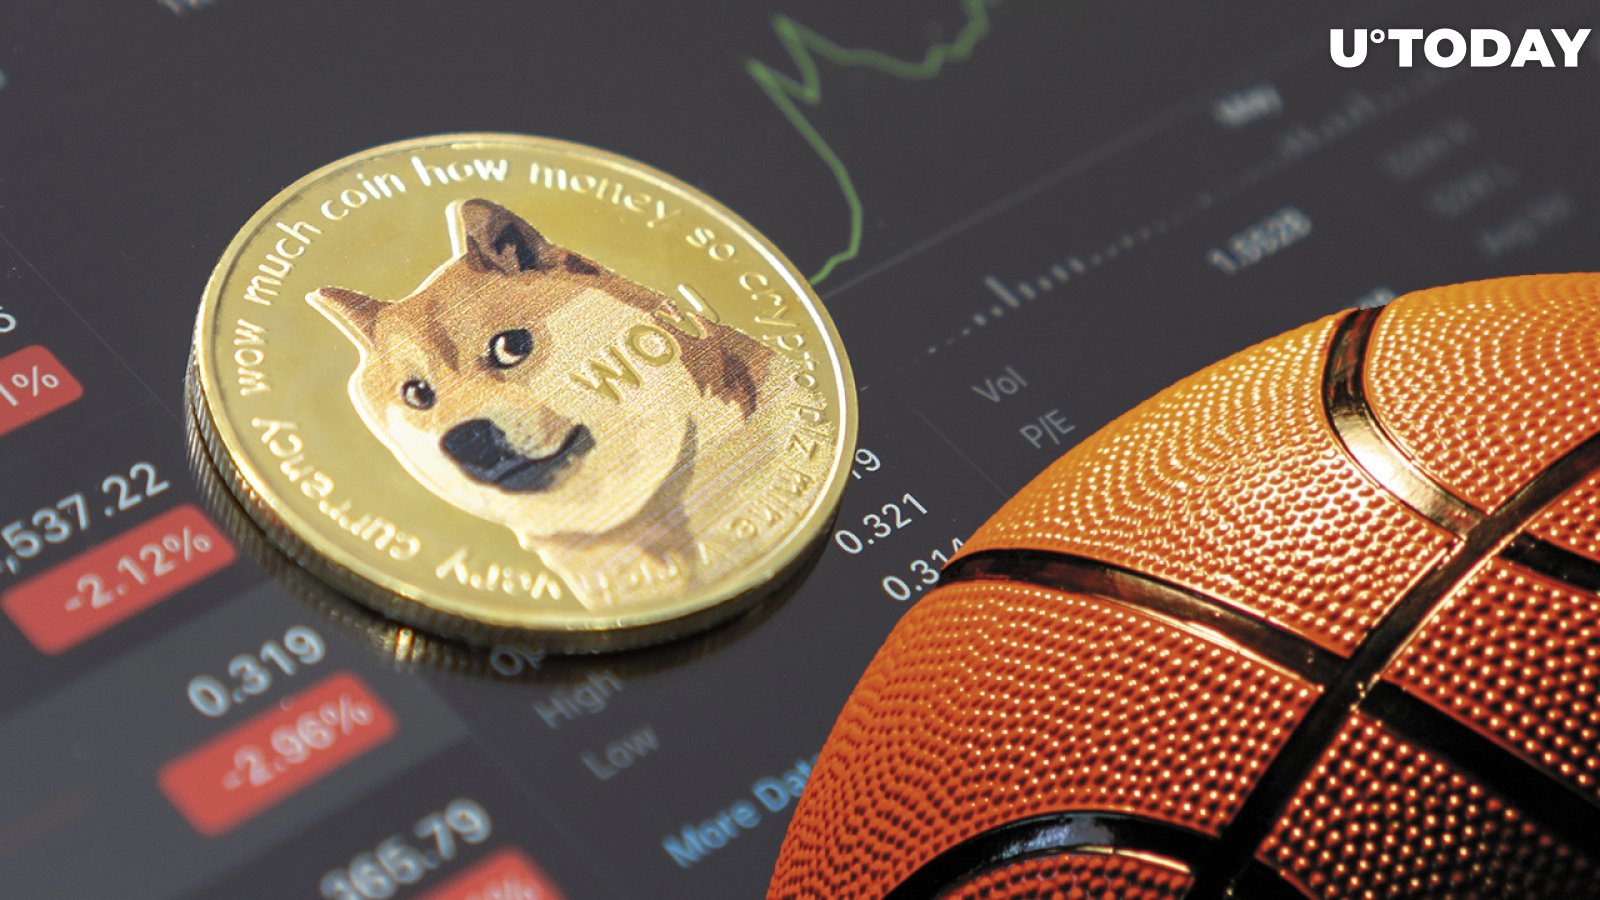 Dogecoin Becomes Part of BIG3 Basketball Team